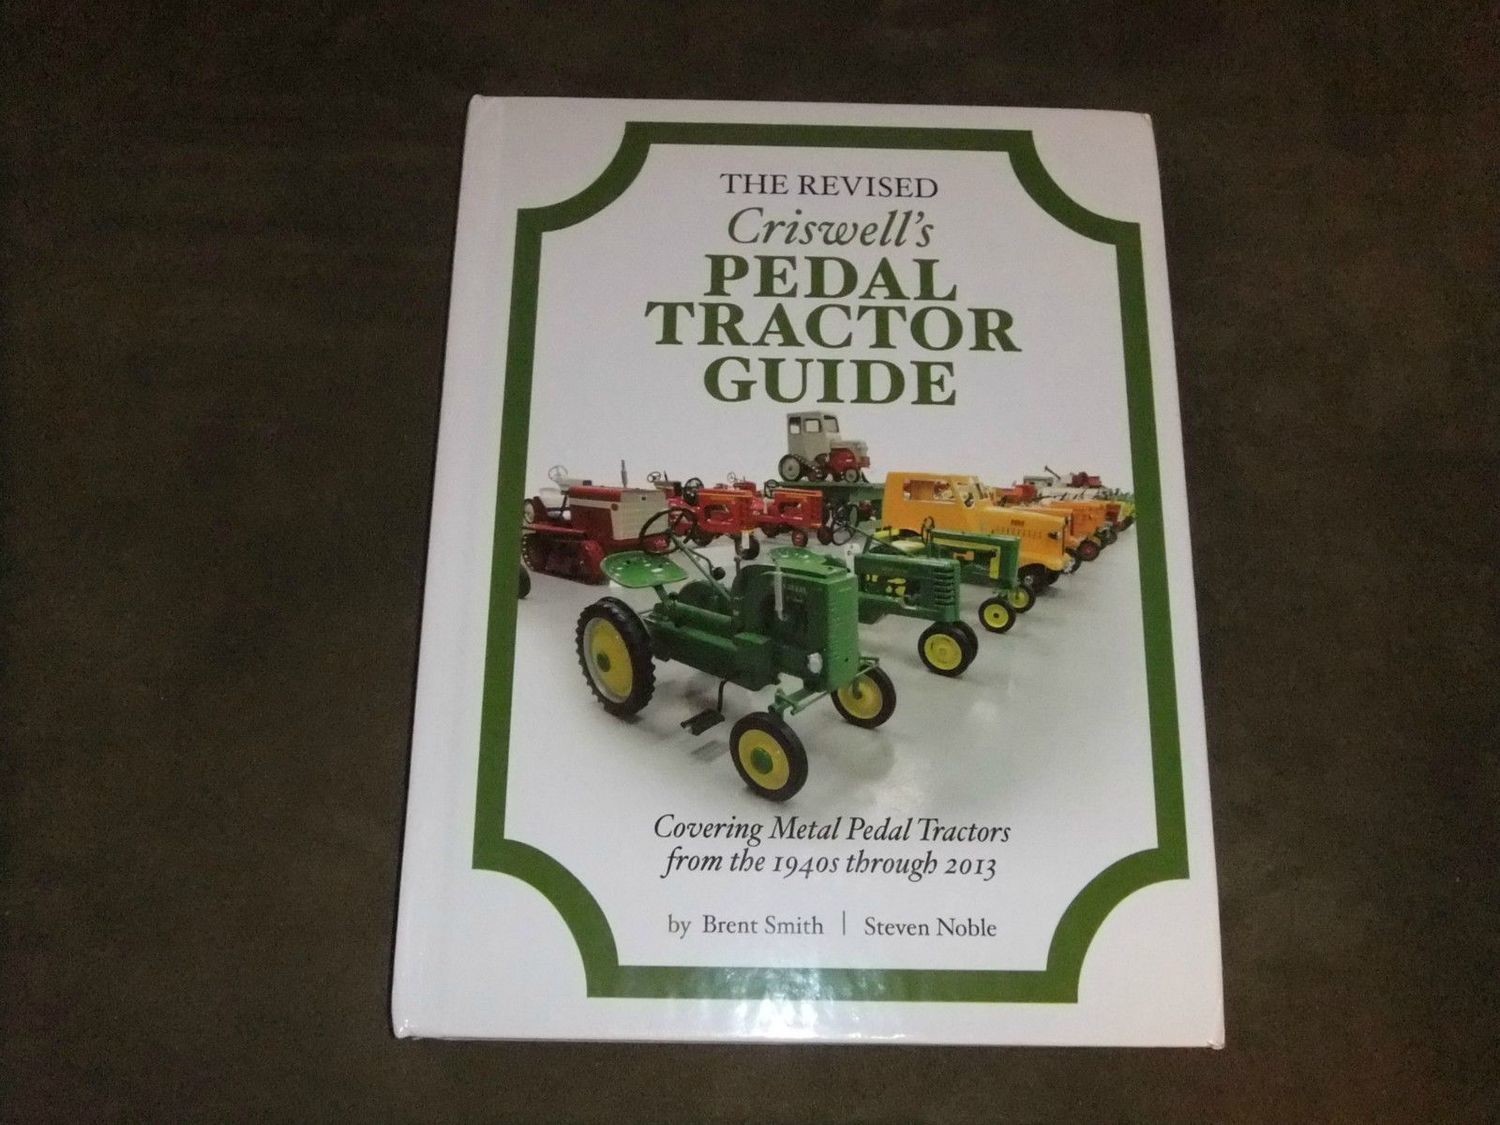 THE REVISED CRIEWELL'S PEDAL TRACTOR GUIDE BOOK